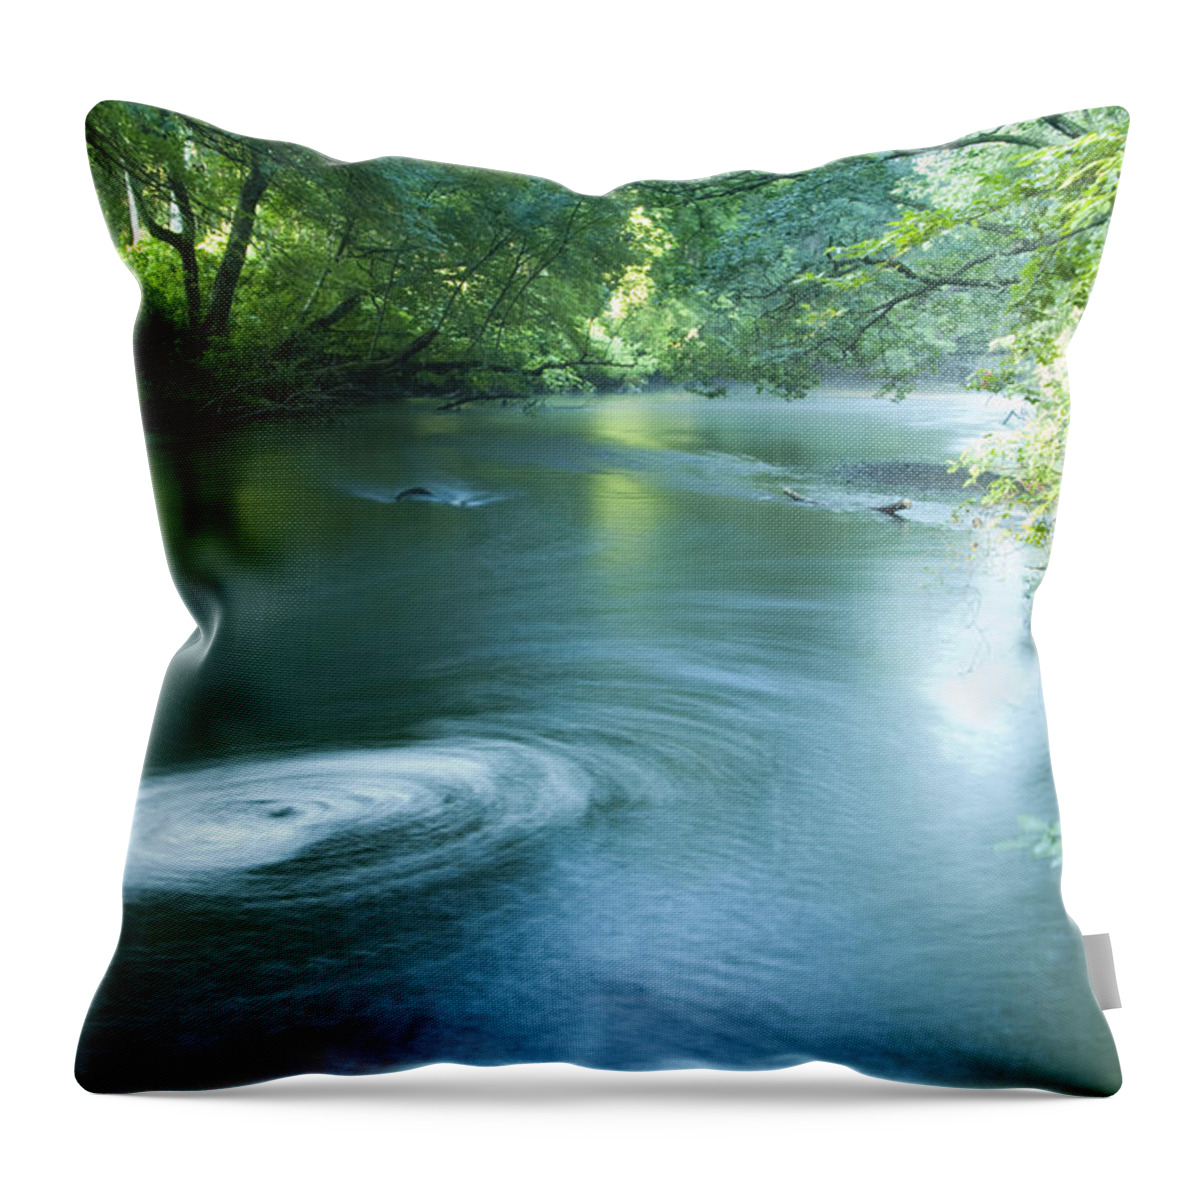 Photography Throw Pillow featuring the photograph Wood River Whirlpool by Steven Natanson